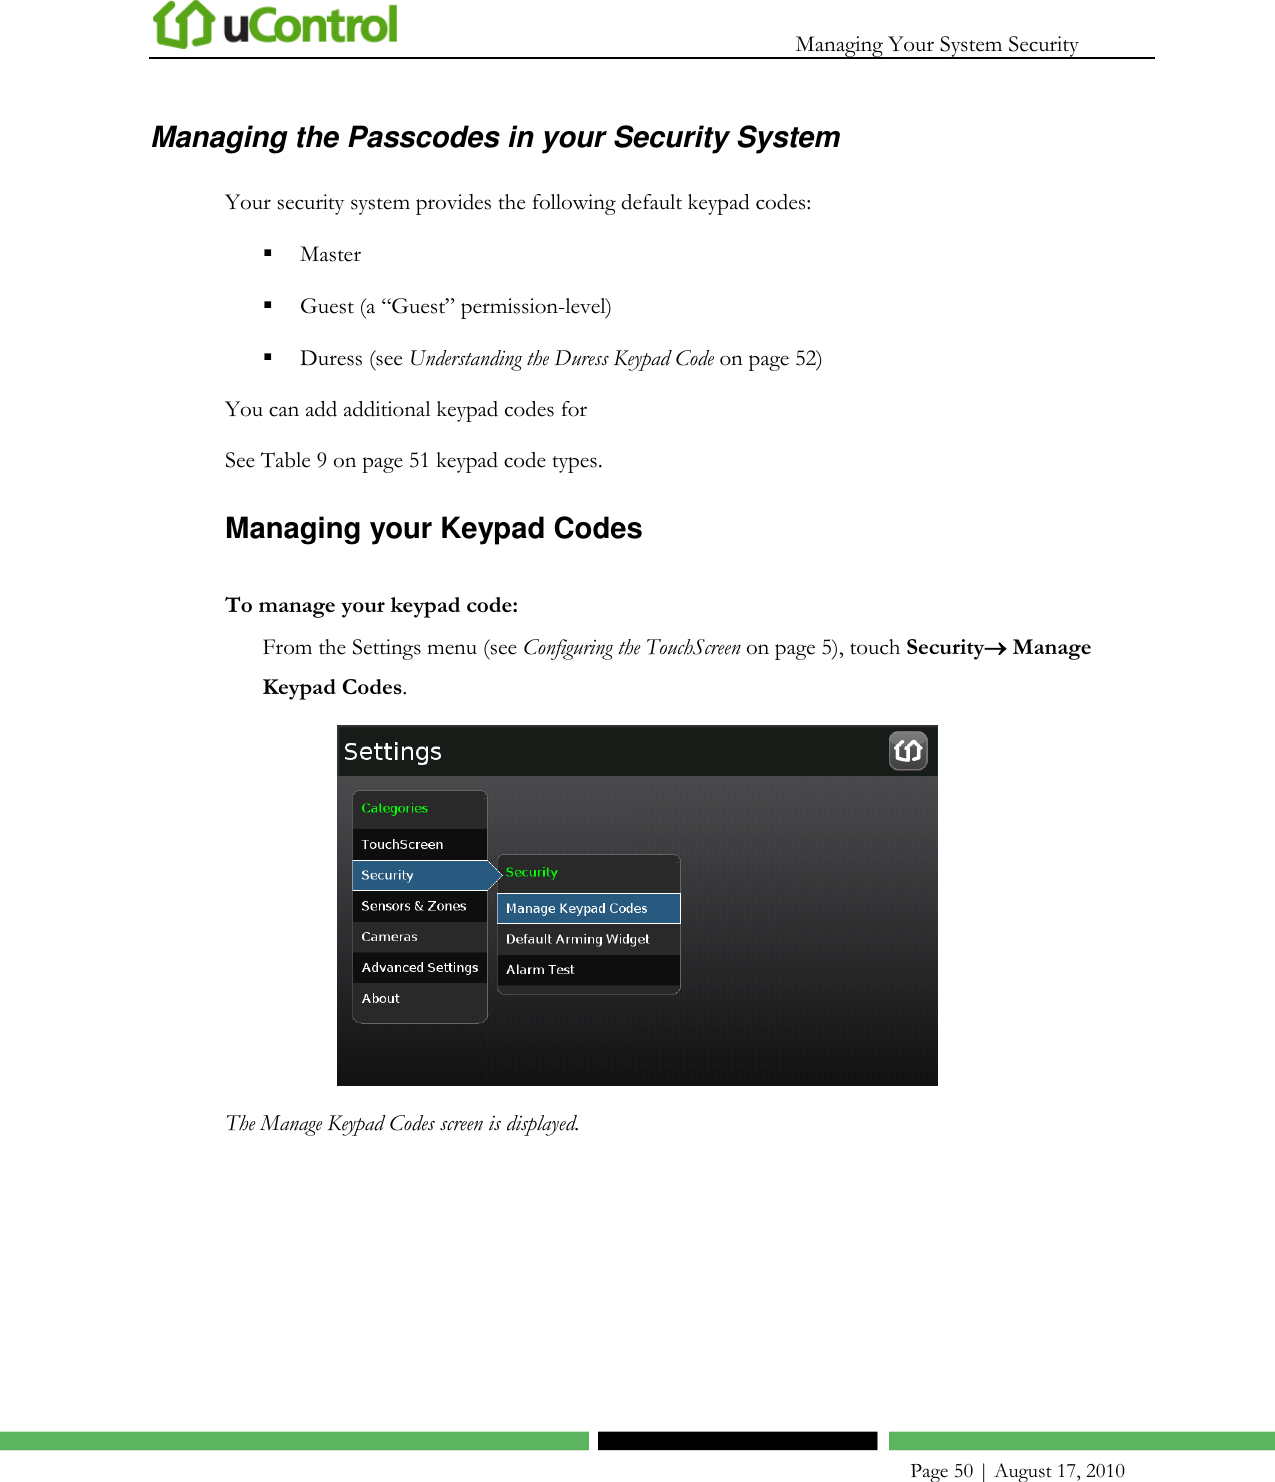   Managing Your System Security    Page 50 | August 17, 2010 Managing the Passcodes in your Security System Your security system provides the following default keypad codes:  Master   Guest (a ―Guest‖ permission-level)  Duress (see Understanding the Duress Keypad Code on page 52) You can add additional keypad codes for  See Table 9 on page 51 keypad code types. Managing your Keypad Codes To manage your keypad code: From the Settings menu (see Configuring the TouchScreen on page 5), touch Security Manage Keypad Codes.  The Manage Keypad Codes screen is displayed. 